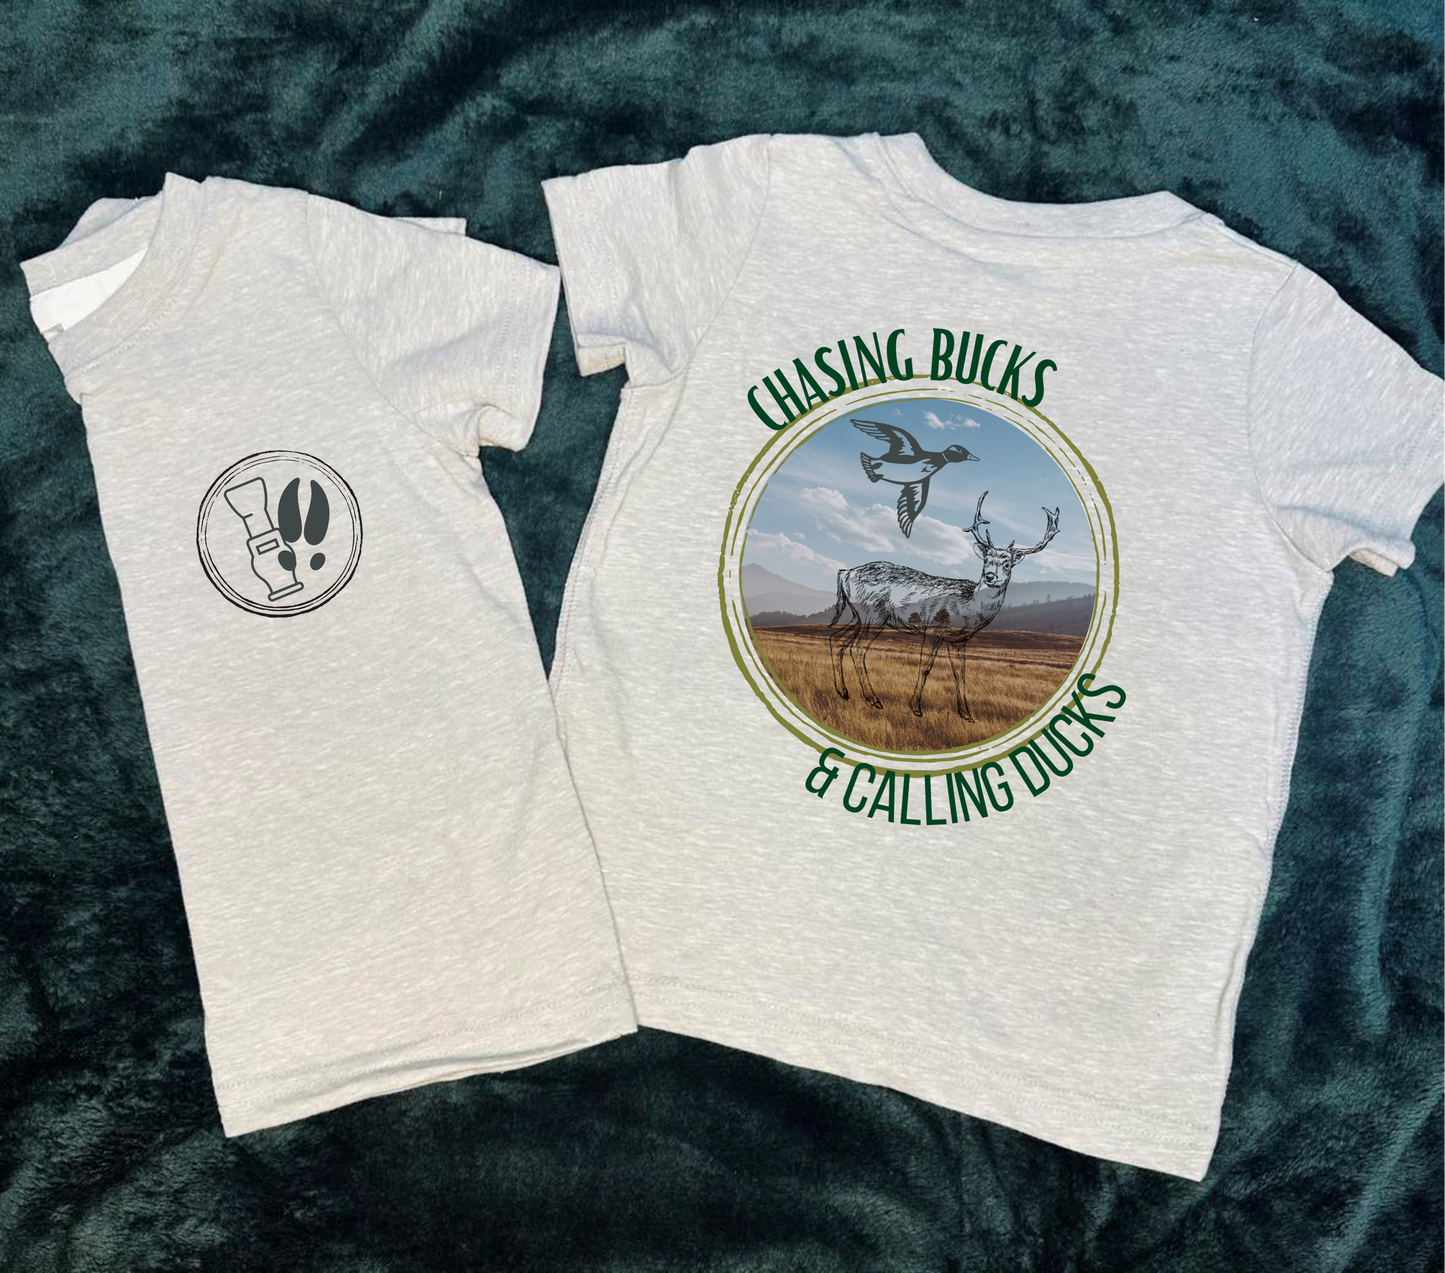 Chasing Bucks and Calling Ducks FRONT AND BACK Ash Grey Tee